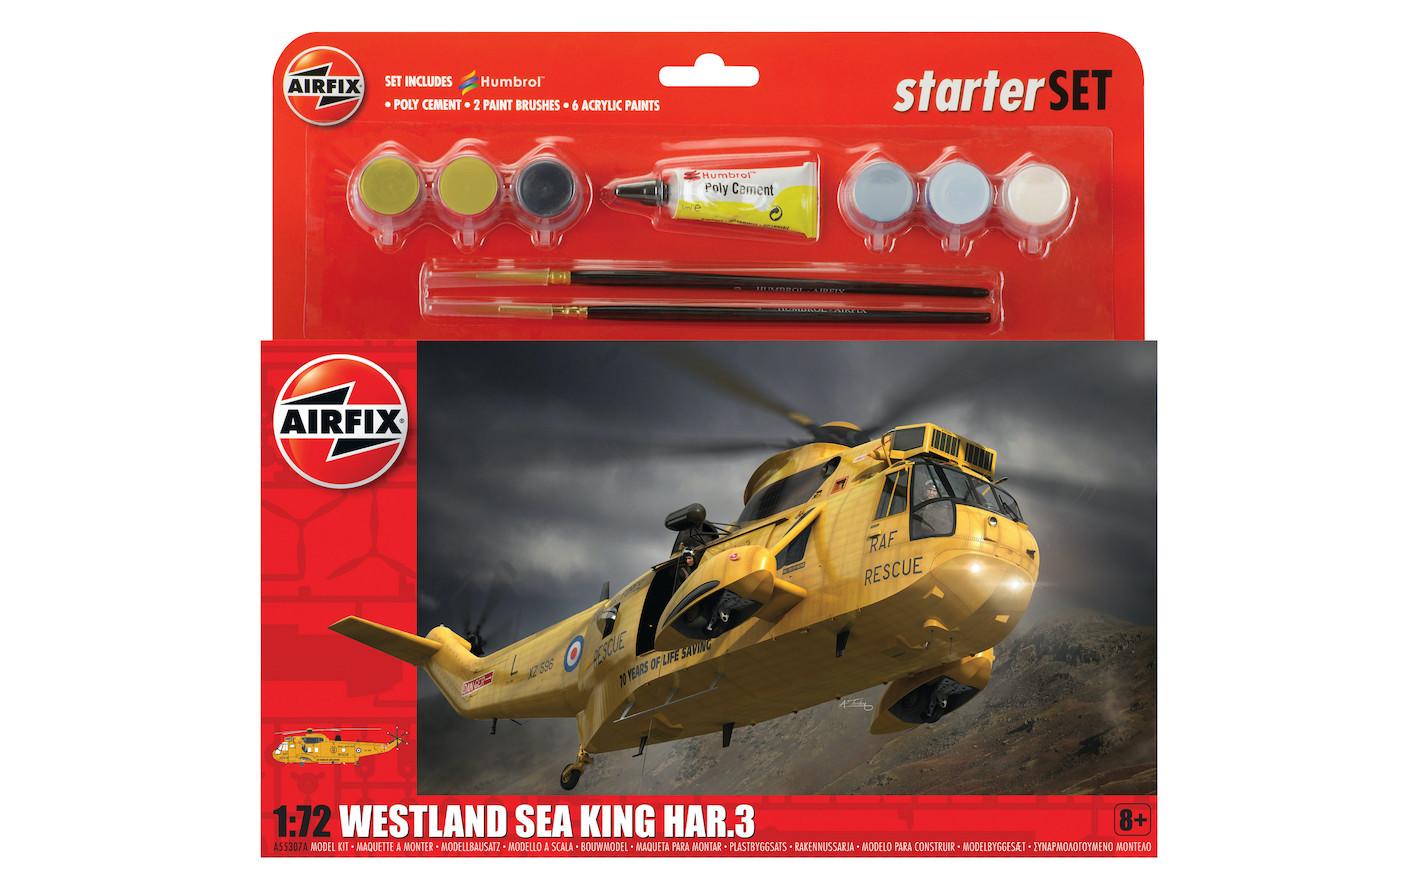 Pack containing model kit of Sea King helicopter including all parts, paints and brushes.